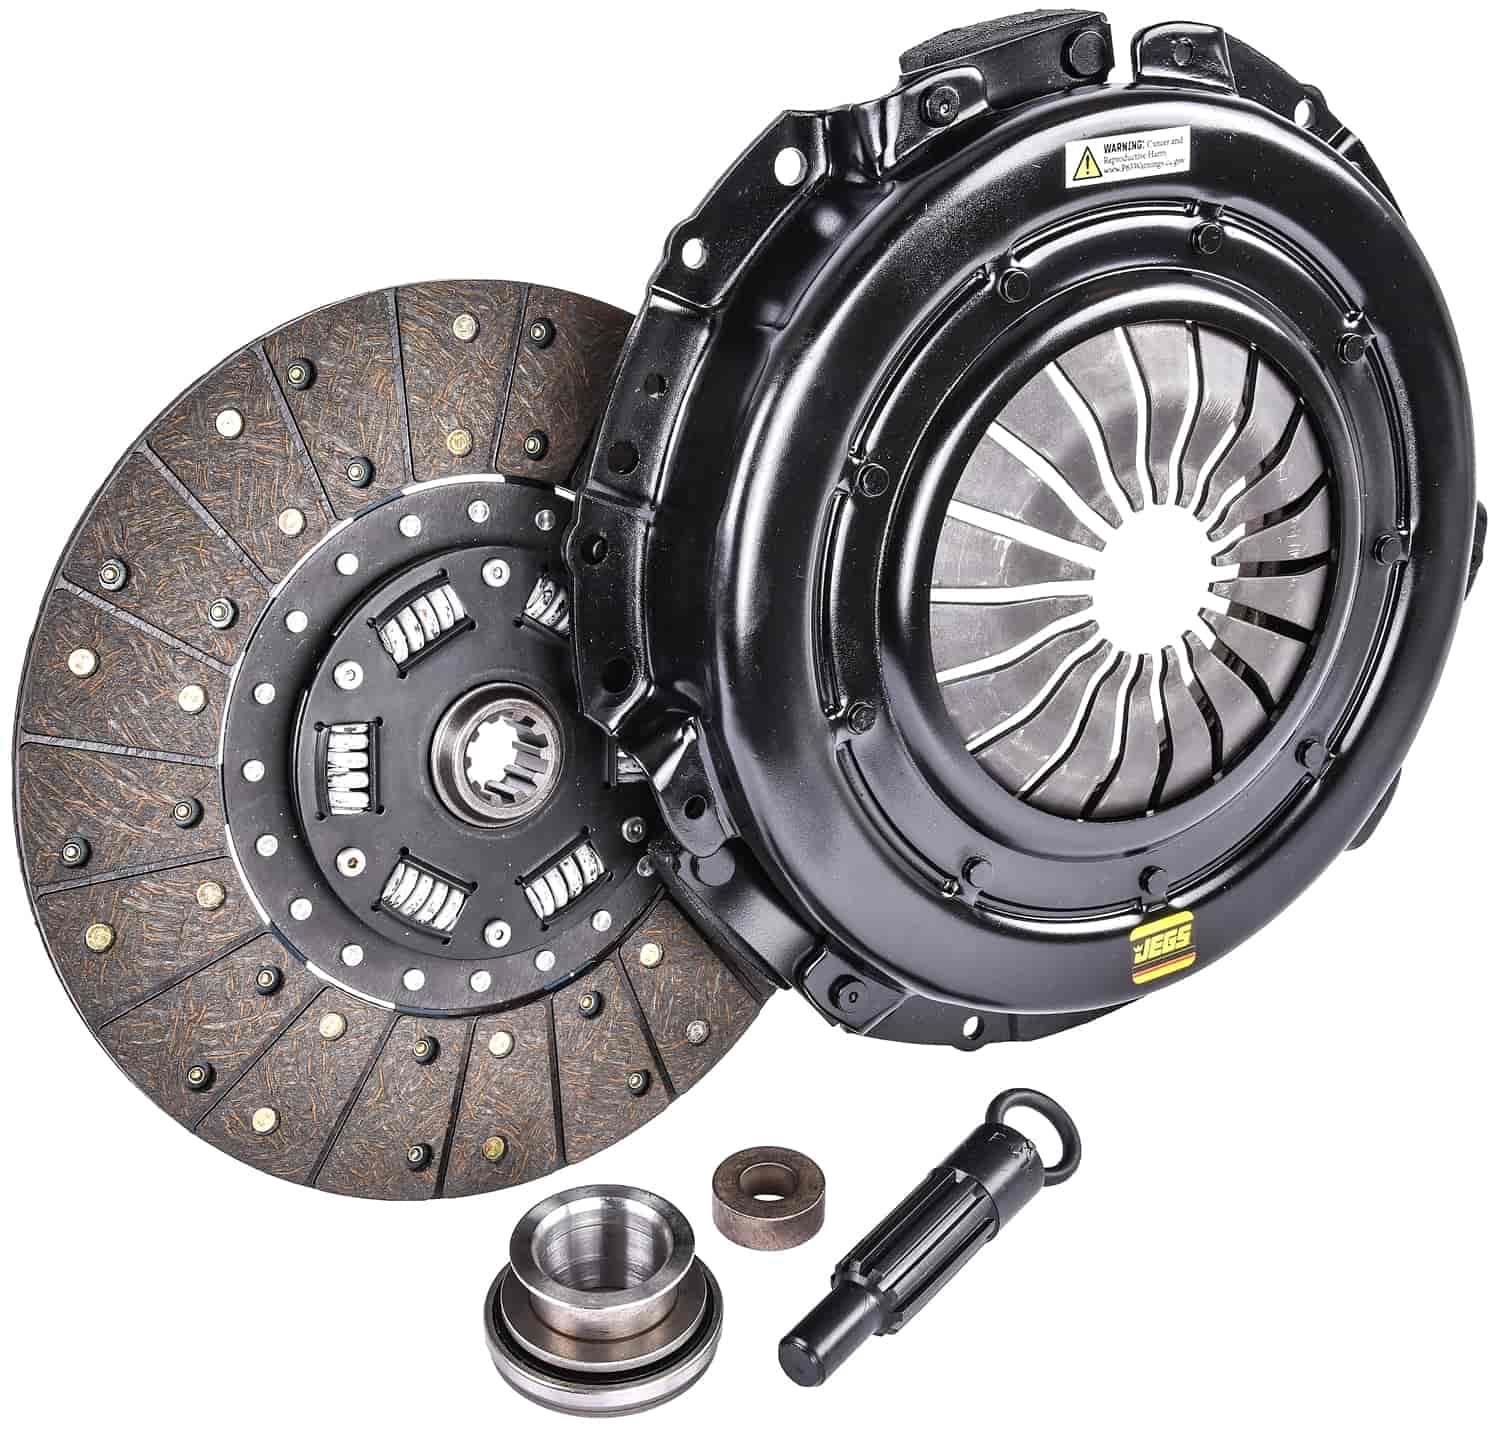 Street Performance Clutch Kit for 1999-2004 Ford Mustang with 4.6L Engine [11 in. Dia., 1 1/16 in. x 10-Spline]